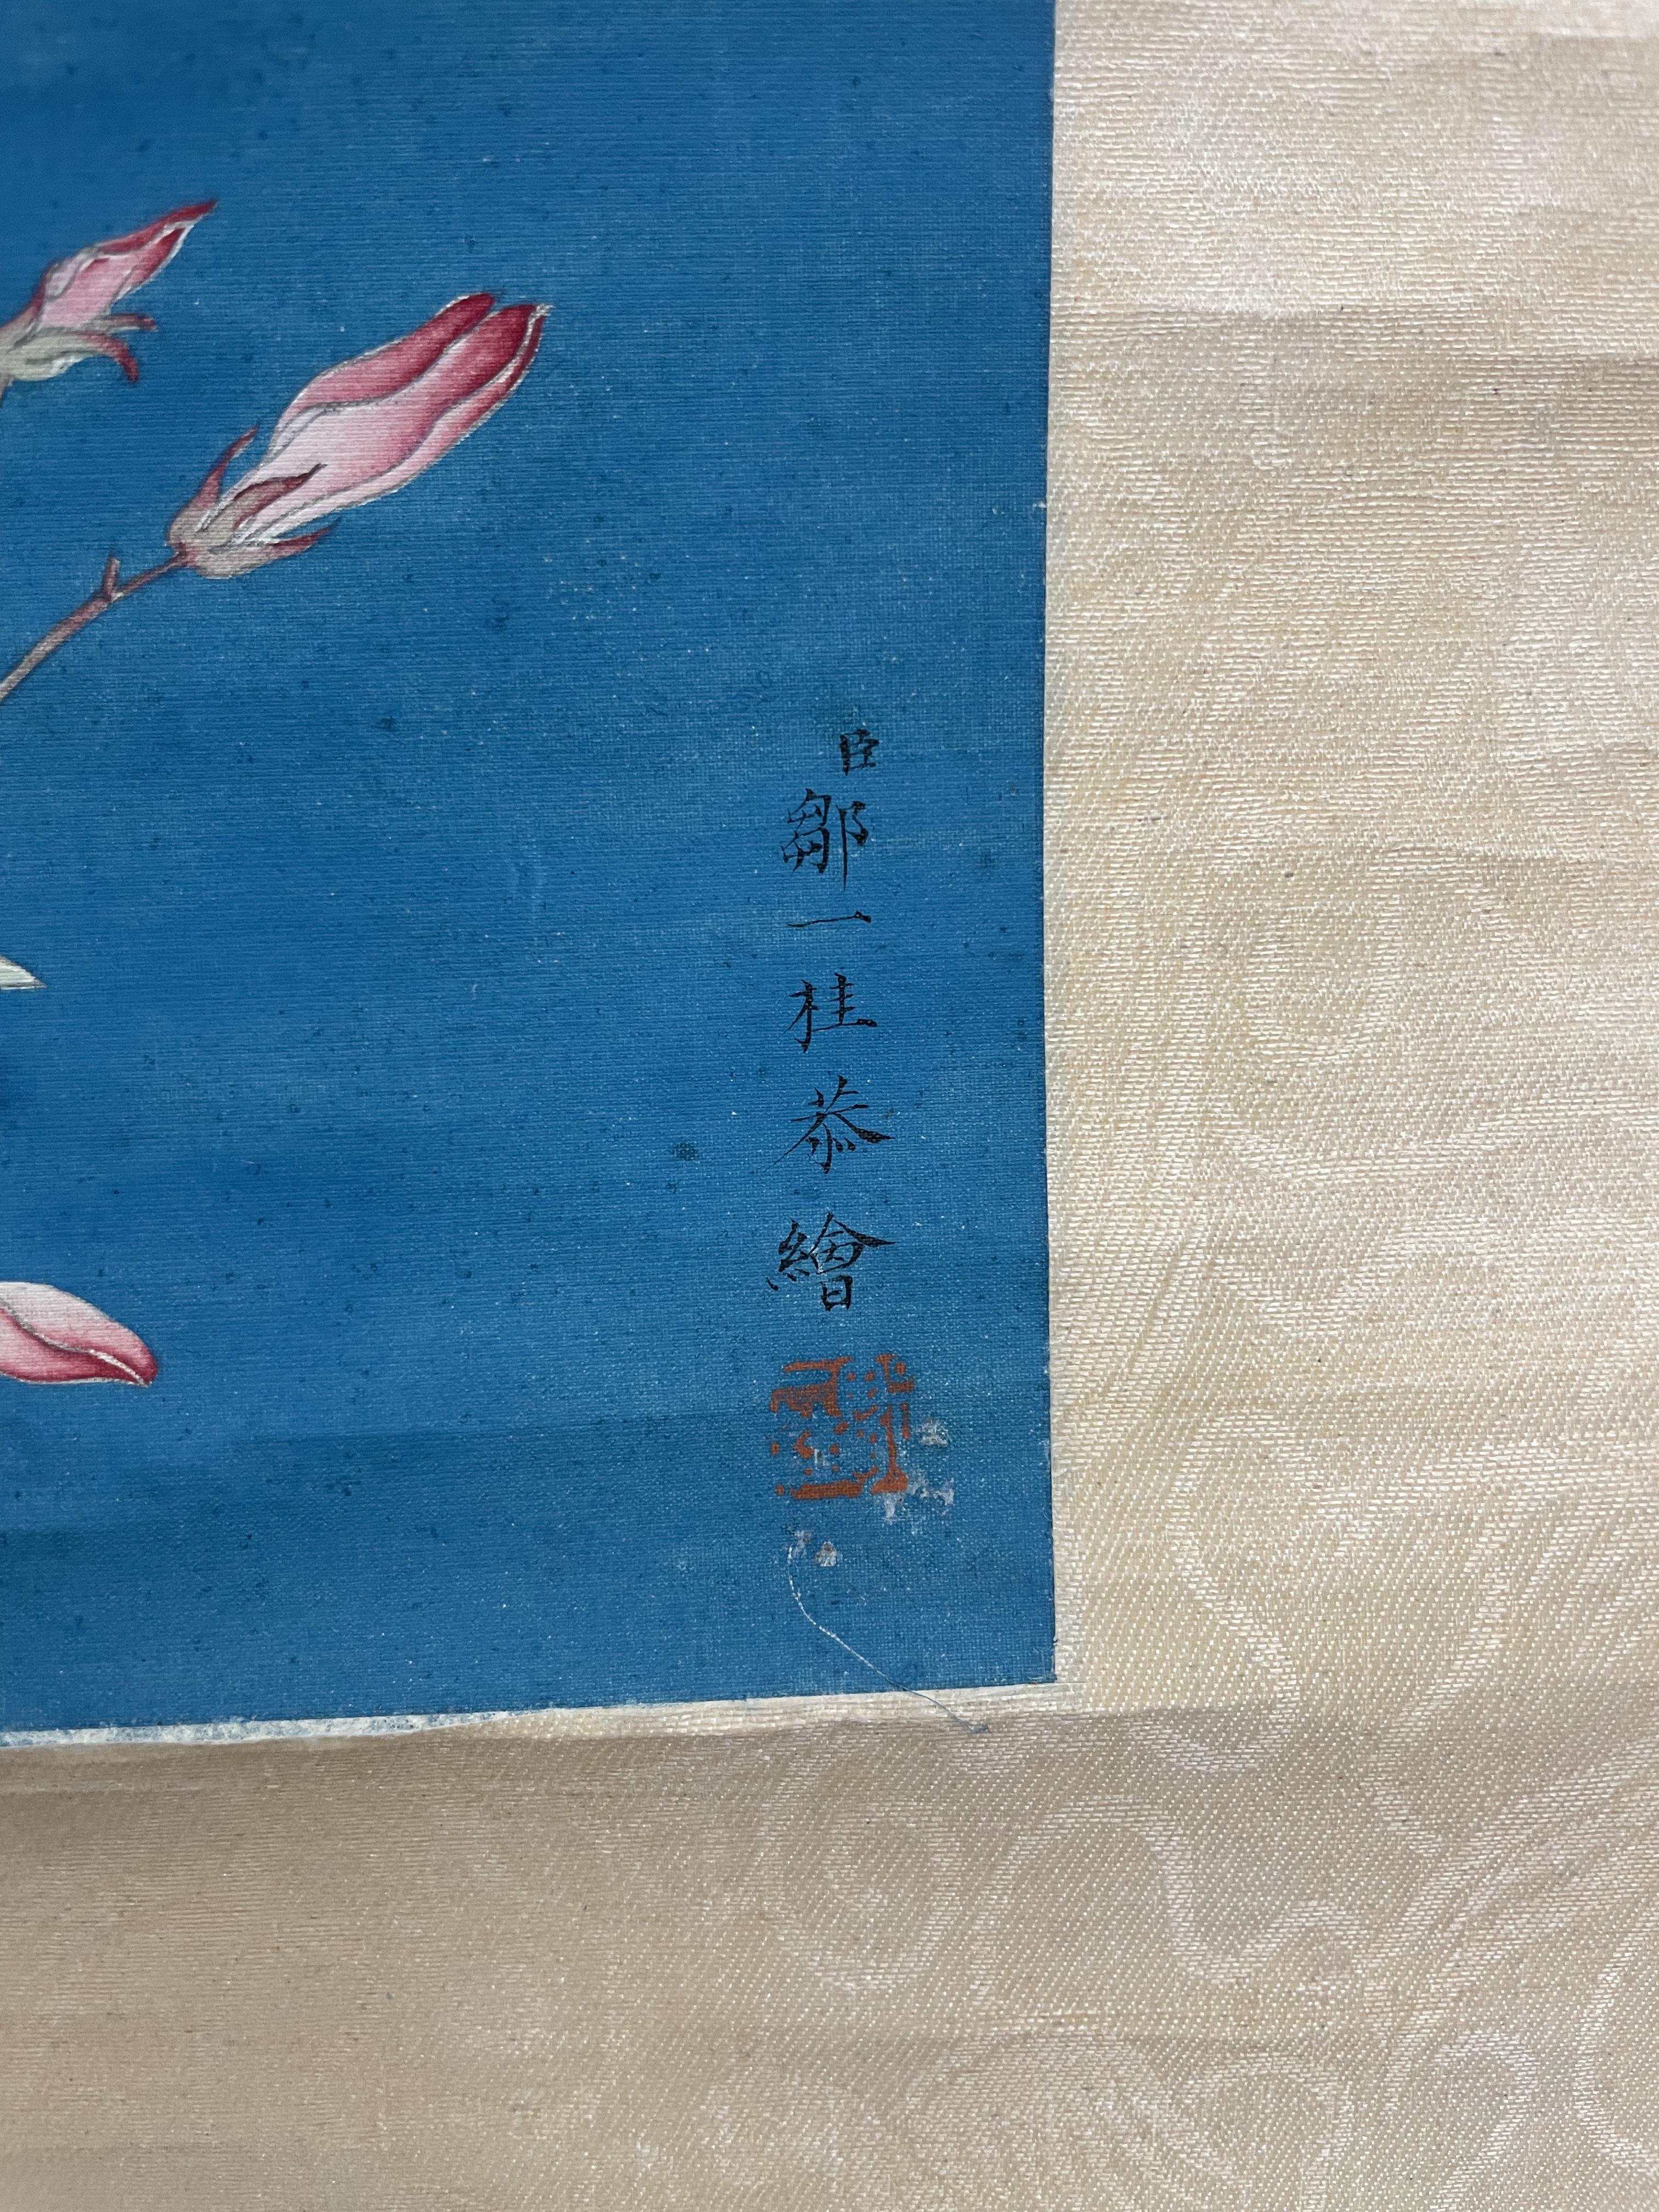 ZOU YIGUI 鄒一桂 (Wuxi, China, 1686 - 1772) Four flower paintings 花卉軸四件 - Image 5 of 17